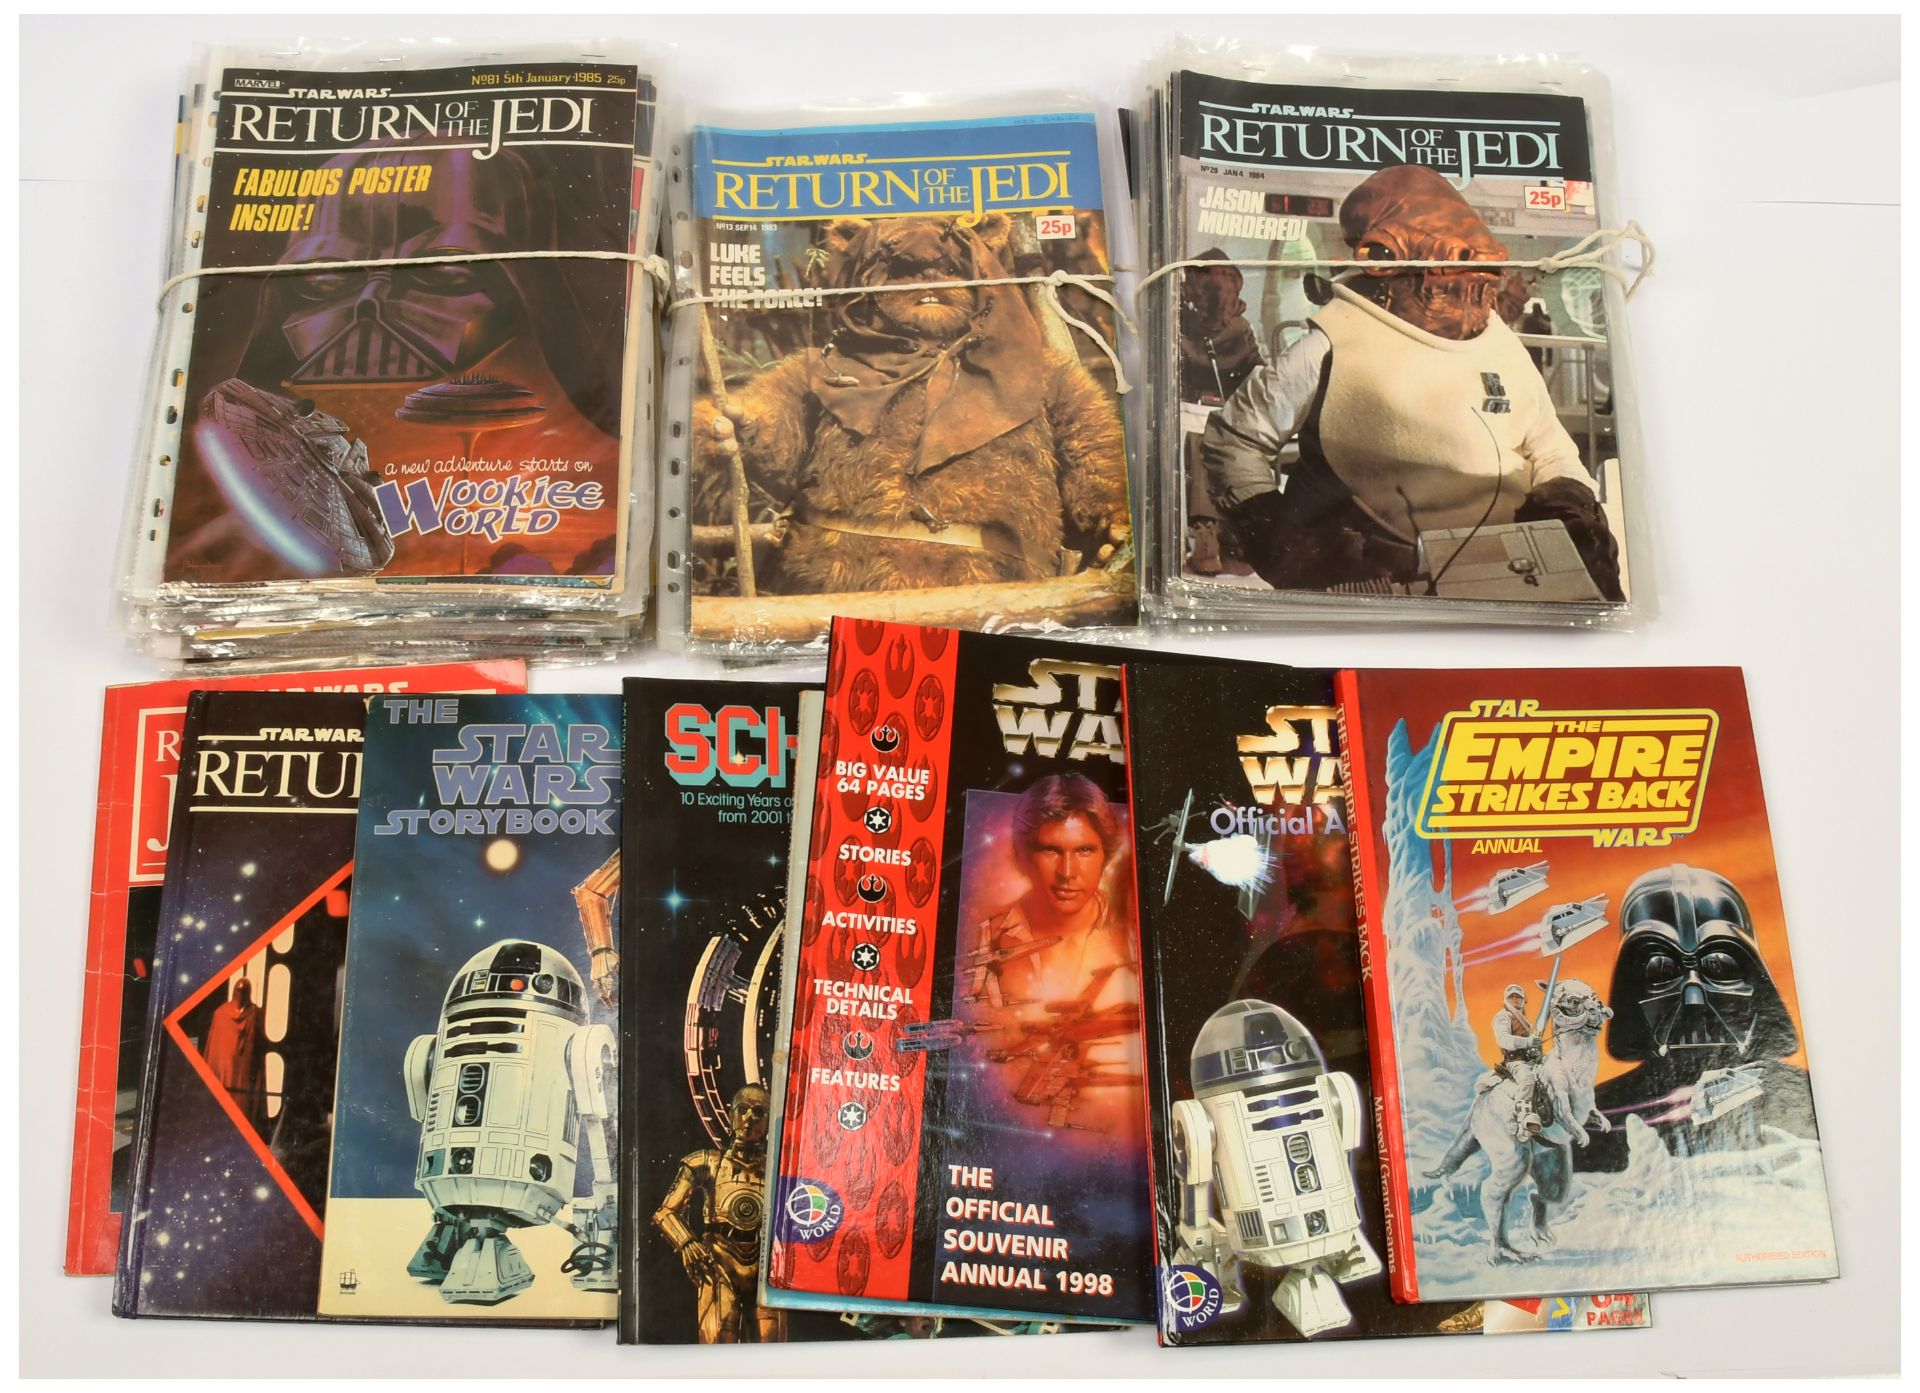 Large quantity of vintage Star Wars Annuals and Return of the Jedi Comics